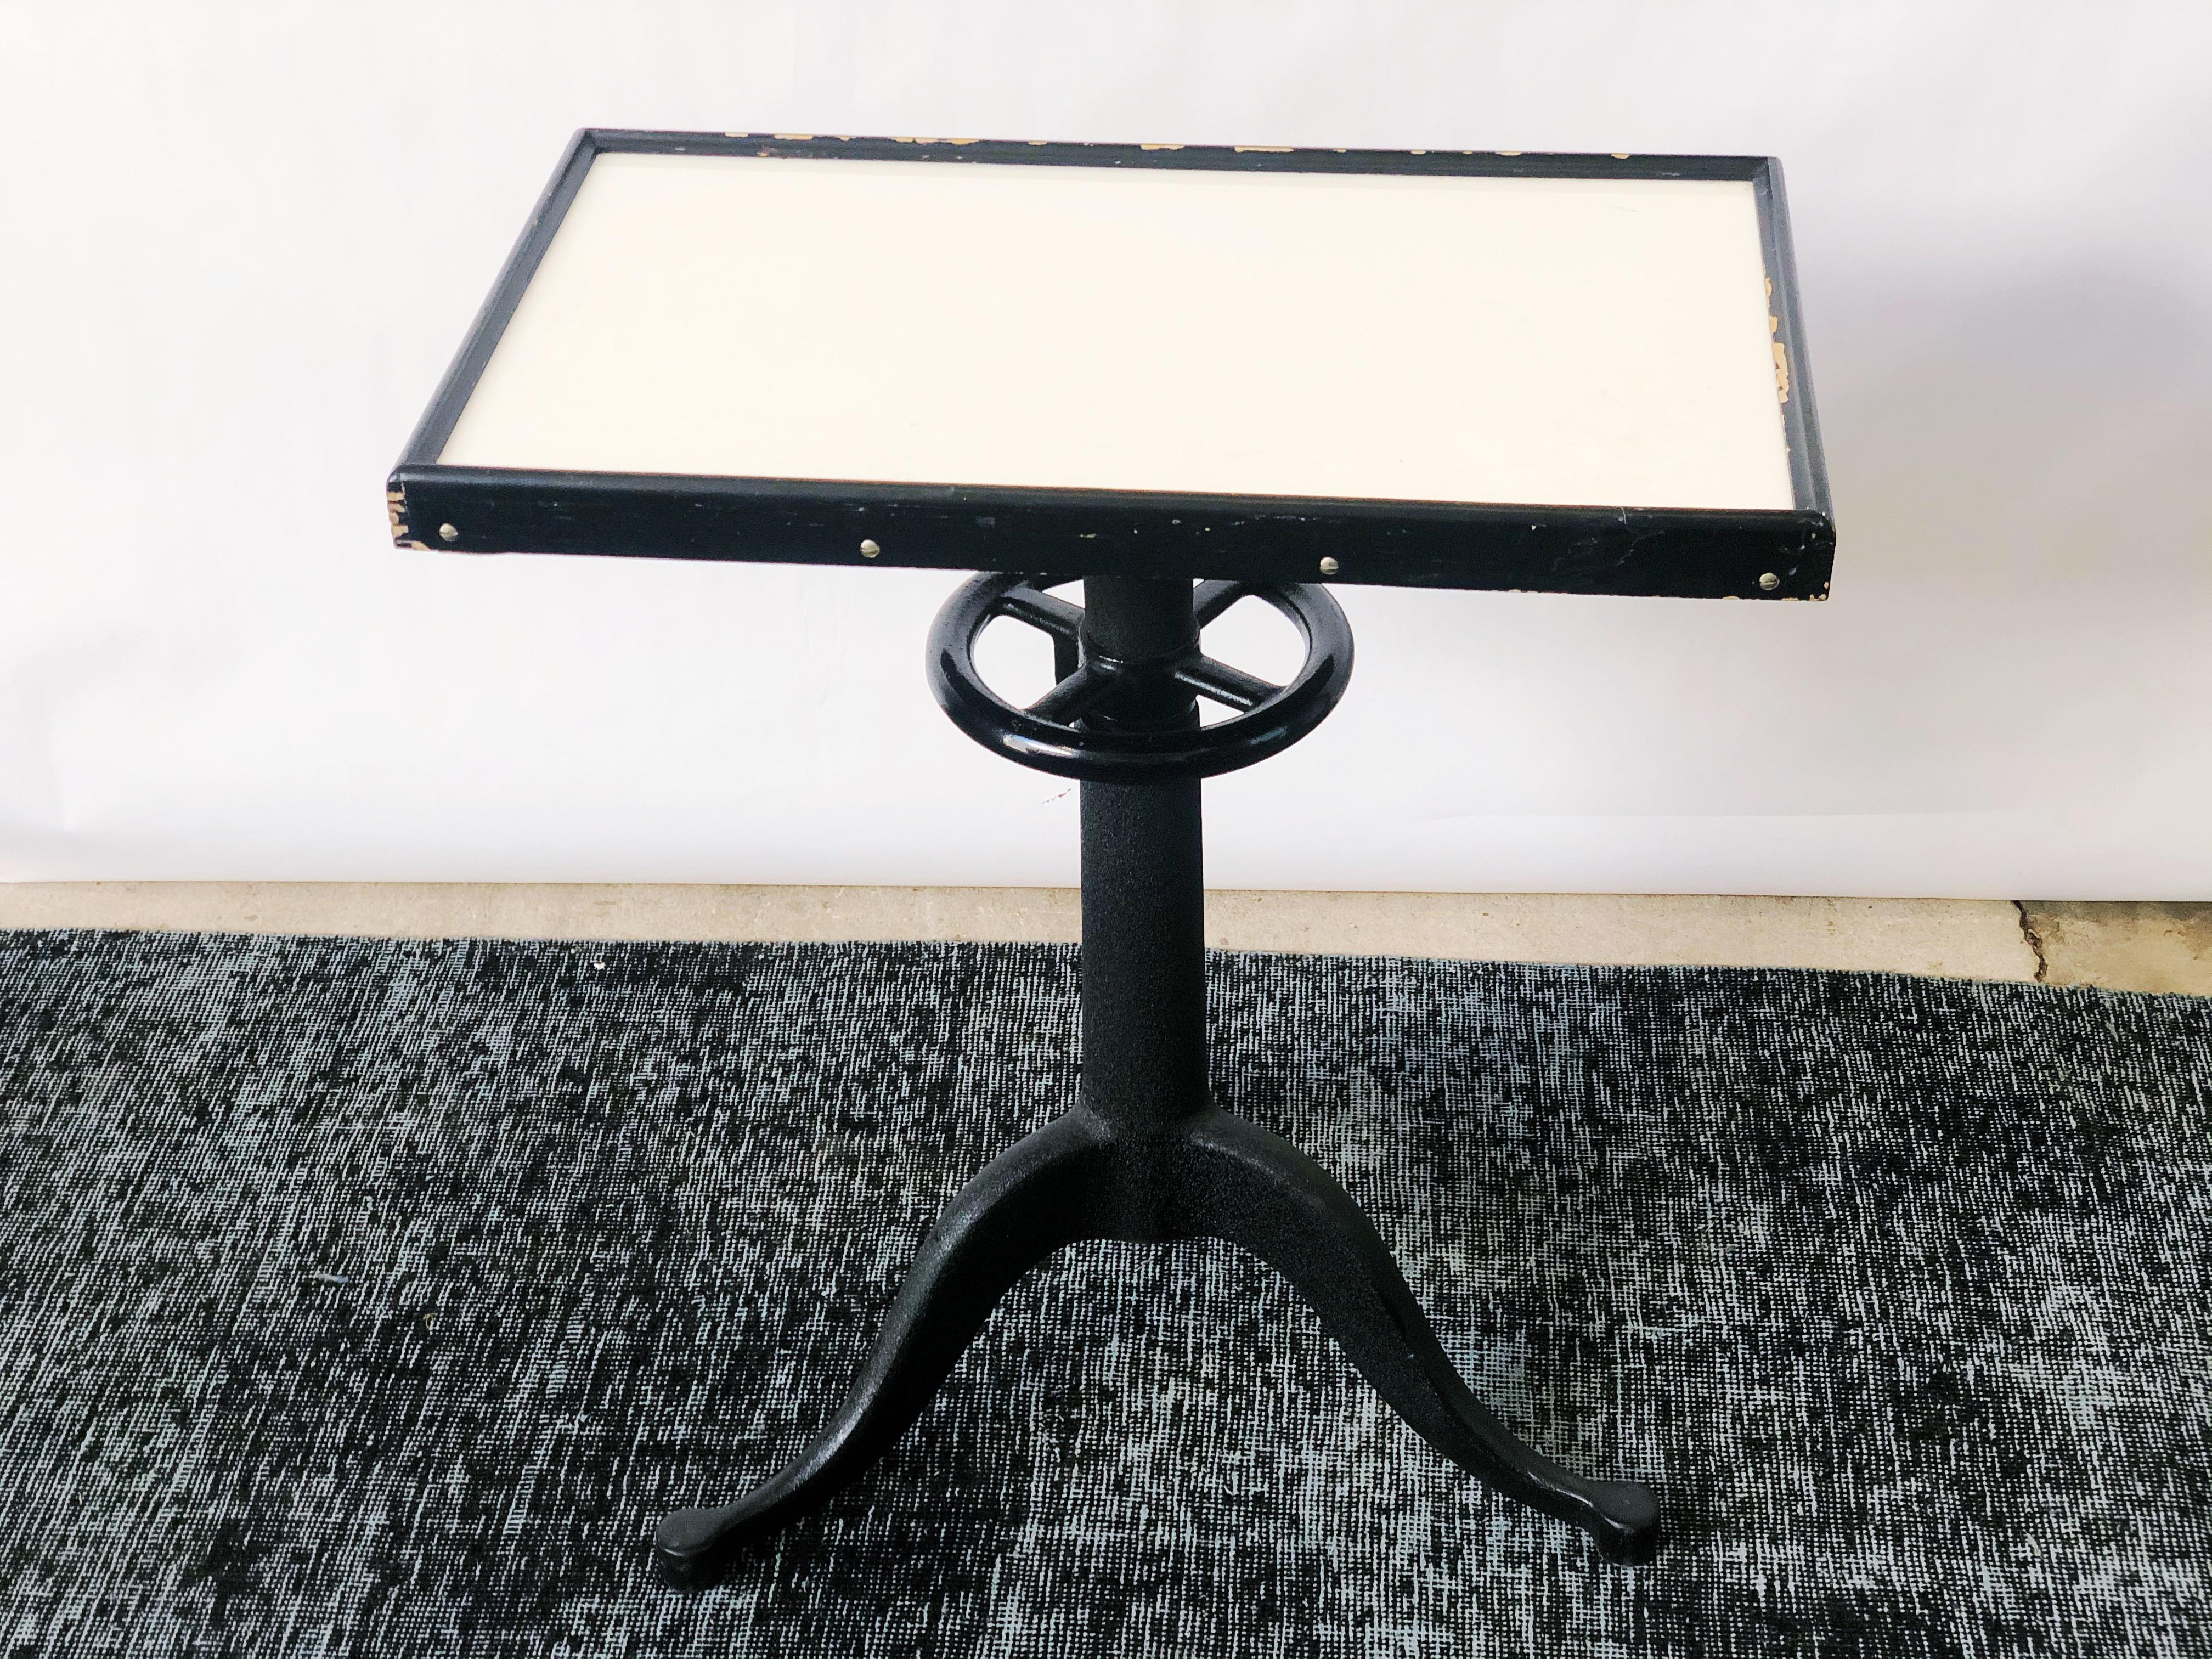 Vintage Optometrist Table with Opaque White Glass Top by Bausch & Lomb, c. 1940s 1